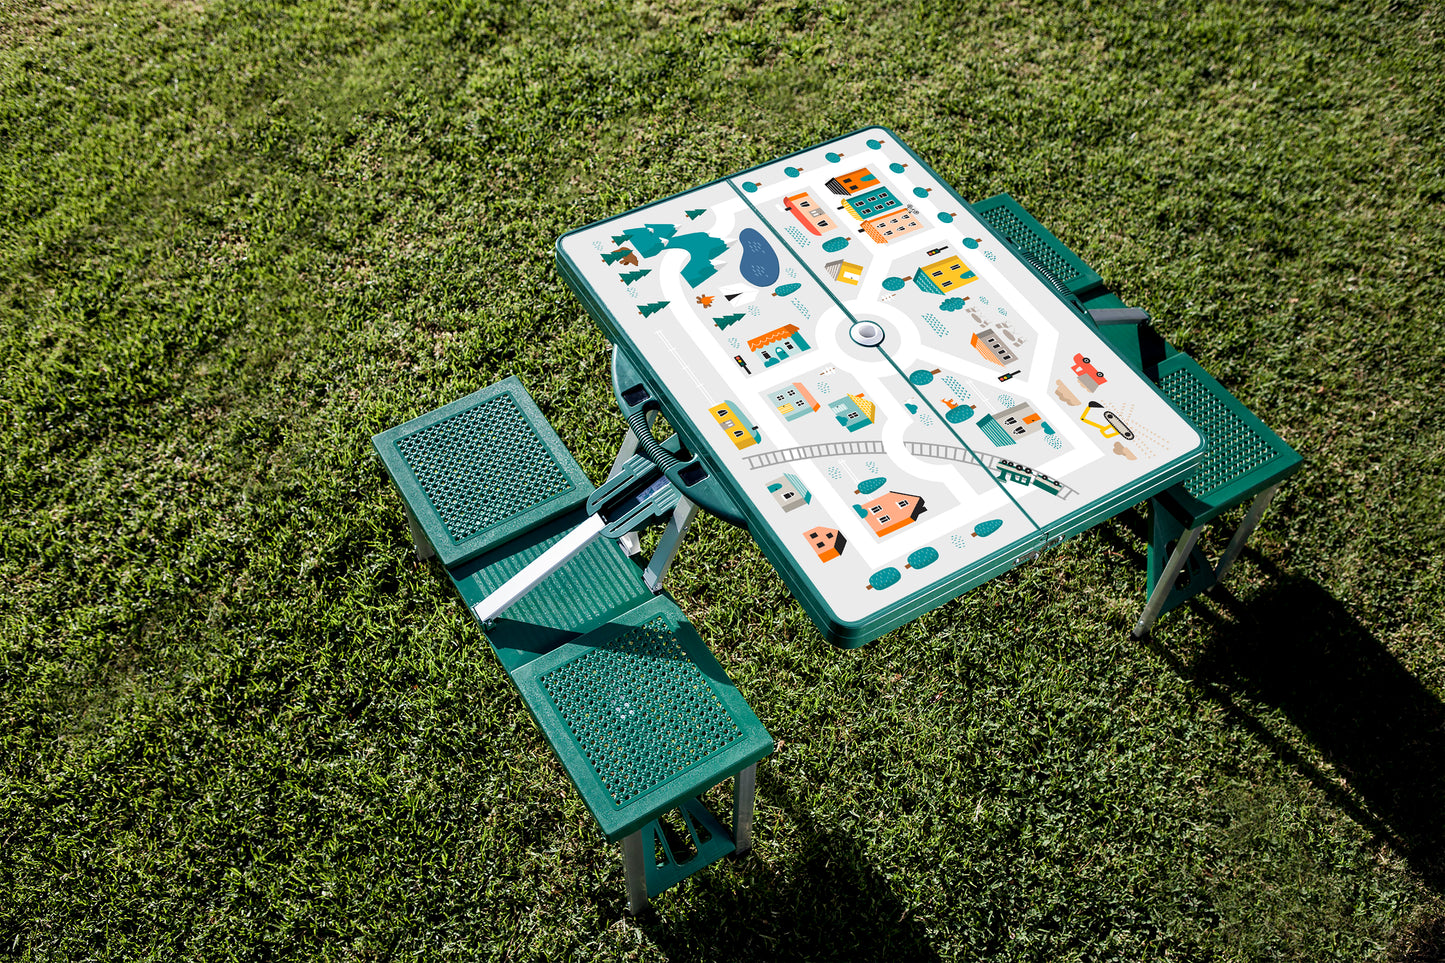 Play Town Picnic Table - Green